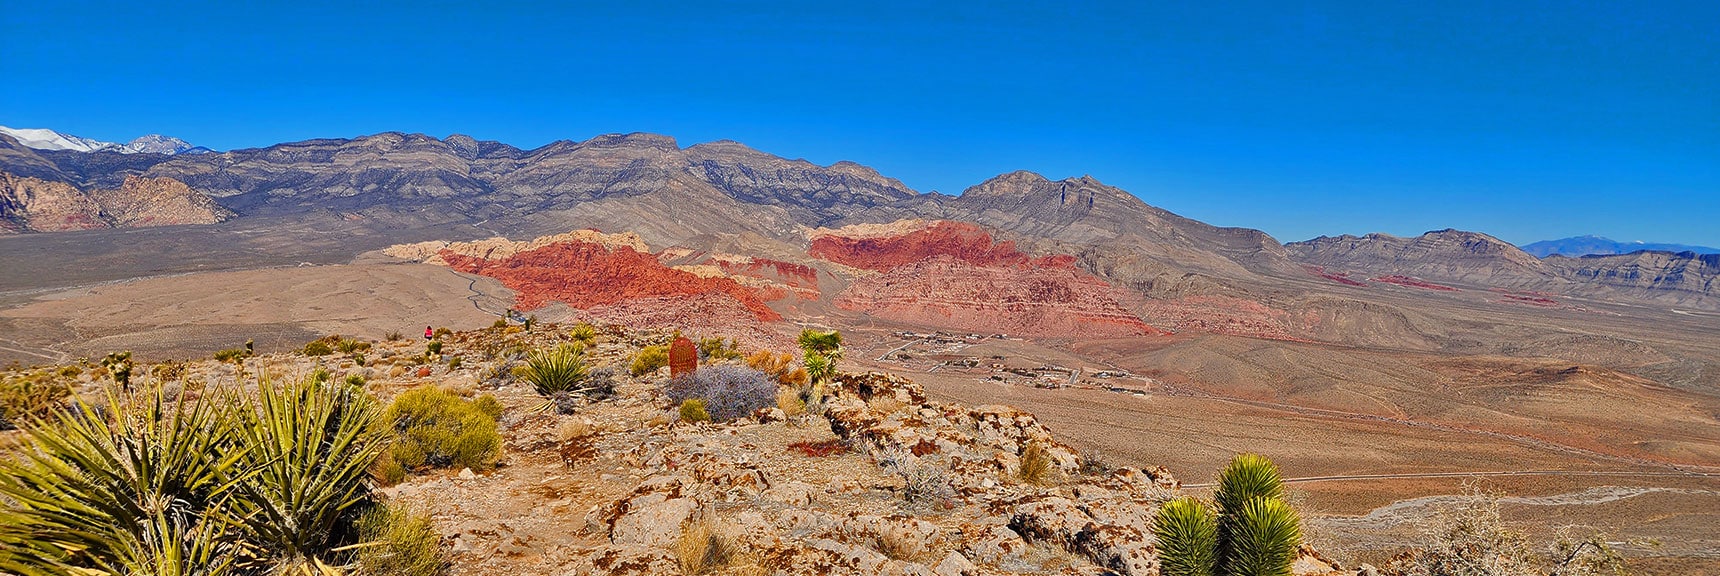 3 Basin View from the South on Blue Diamond Hill | 3 Basin Circuit | Calico Basin, Brownstone Basin, Red Rock Canyon, Nevada